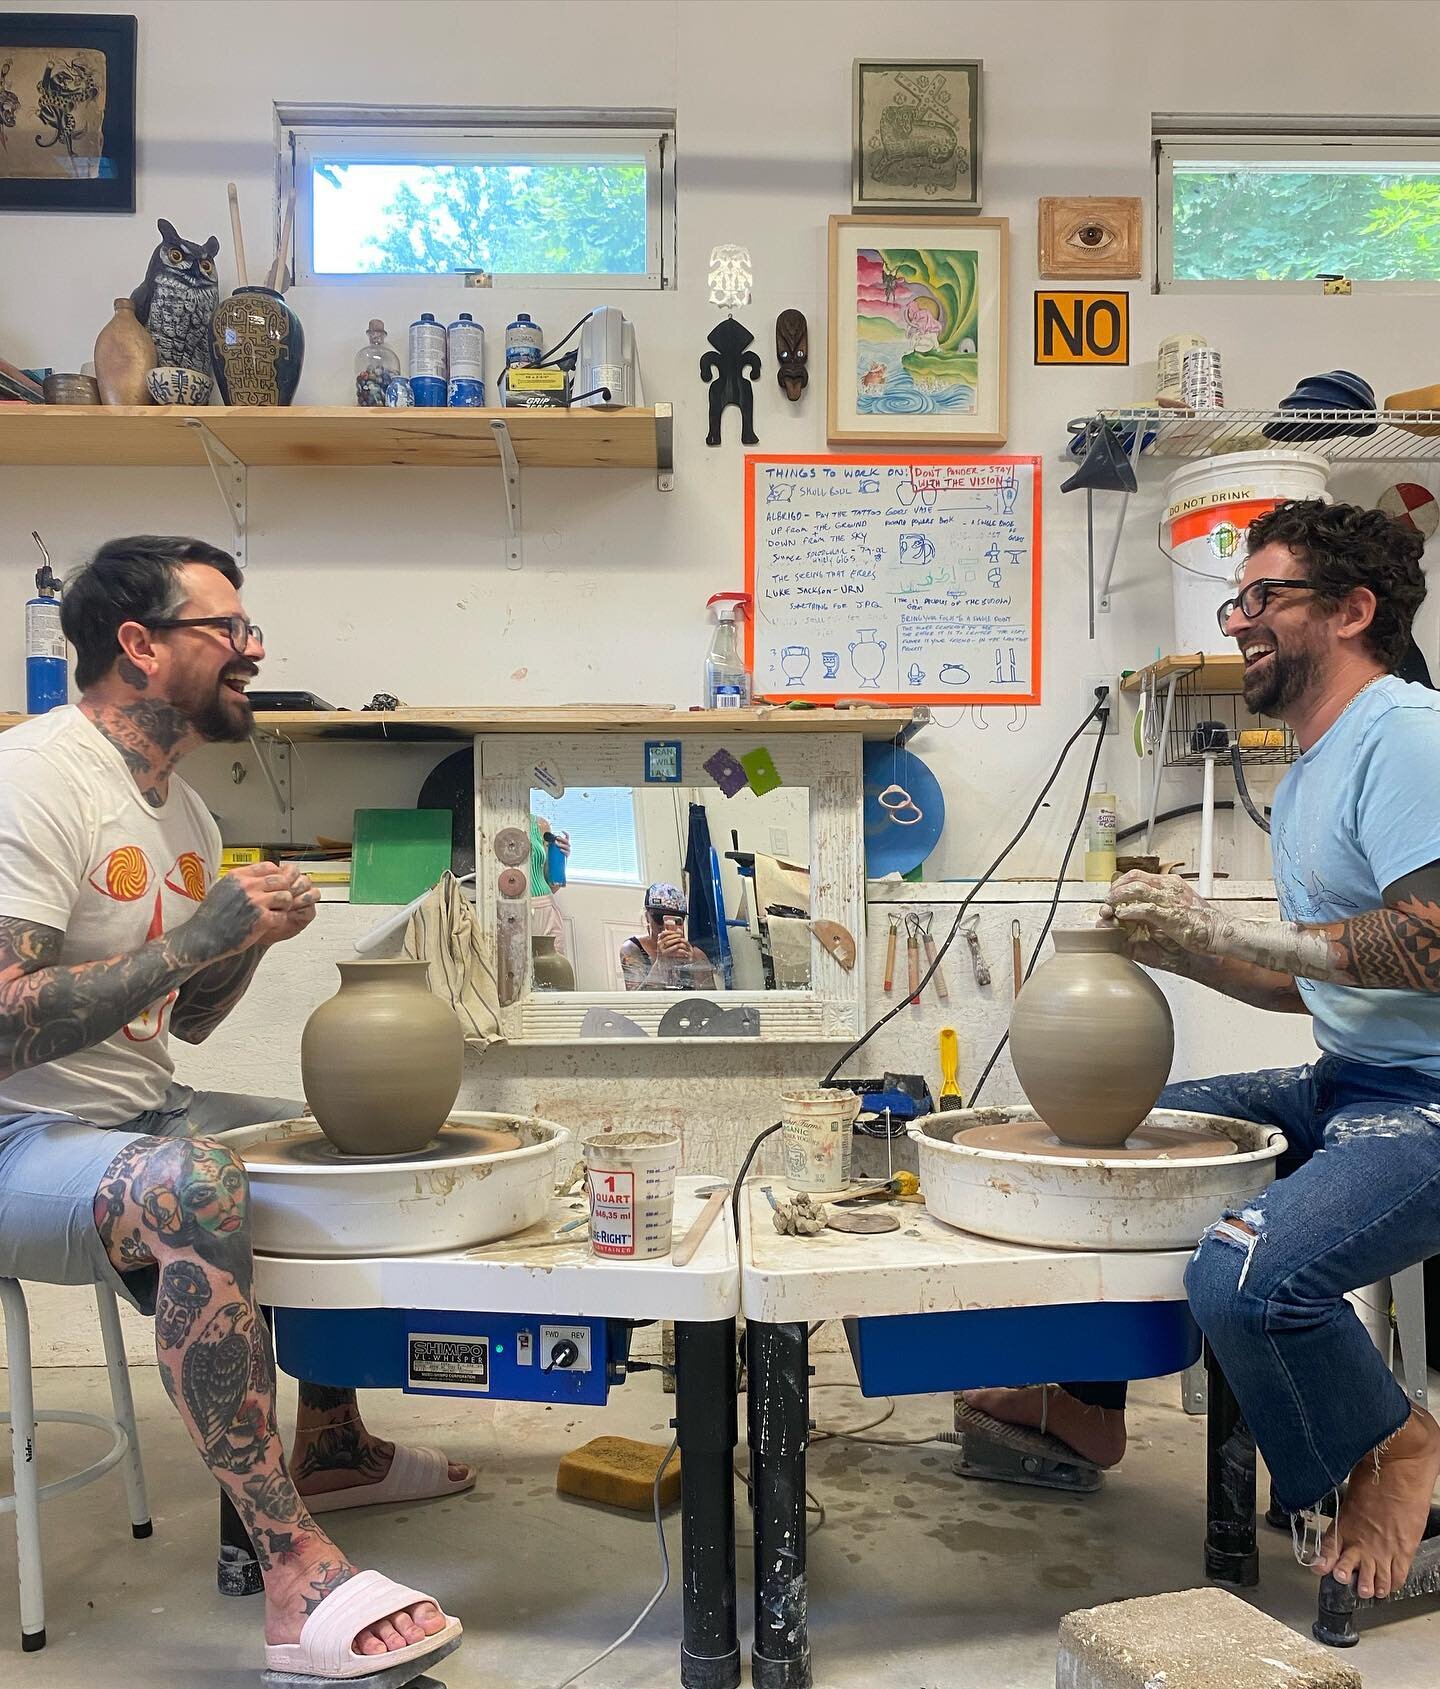 .
Had a lil away-from-home-dirt-shape-session in the cool and inspired studio of my good friend @apshrewsbury&mdash;

&hellip; and (as evidenced by this hilarious photo) we had the most fun that 2 potters have ever had in the 20,000 year history of t